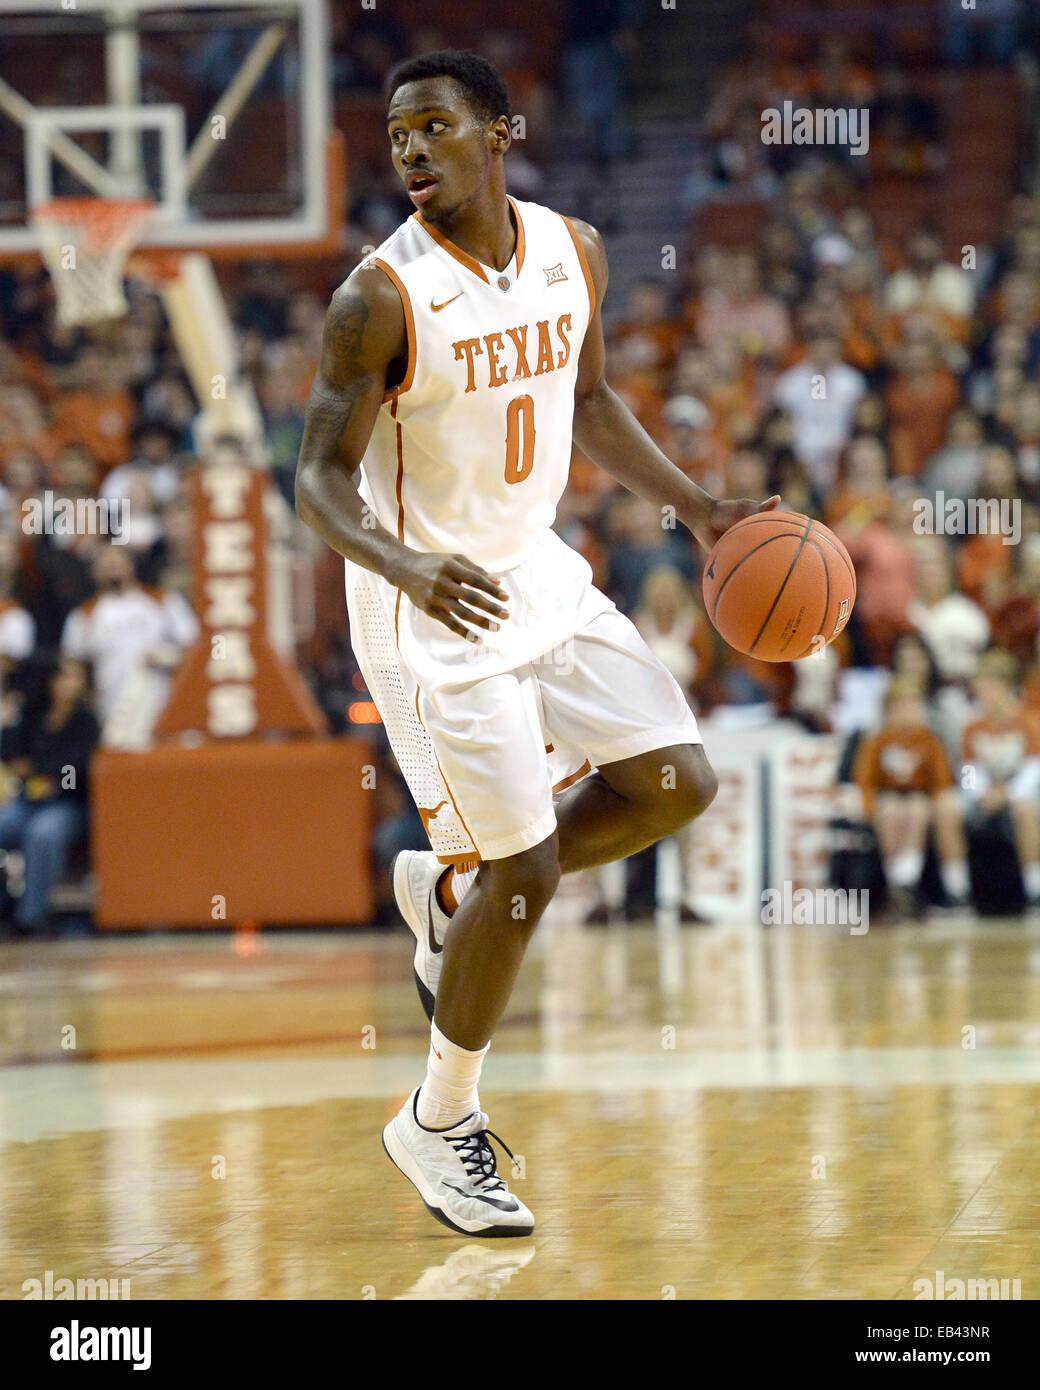 Austin, Texas. 25th Nov, 2014. Kendal Yancy #0 of the Texas Longhorns in action vs the Saint Francis Red Flash at the Frank Erwin Center in Austin Texas. Texas leads Saint Francis 36-23 at the half. Credit:  csm/Alamy Live News Stock Photo